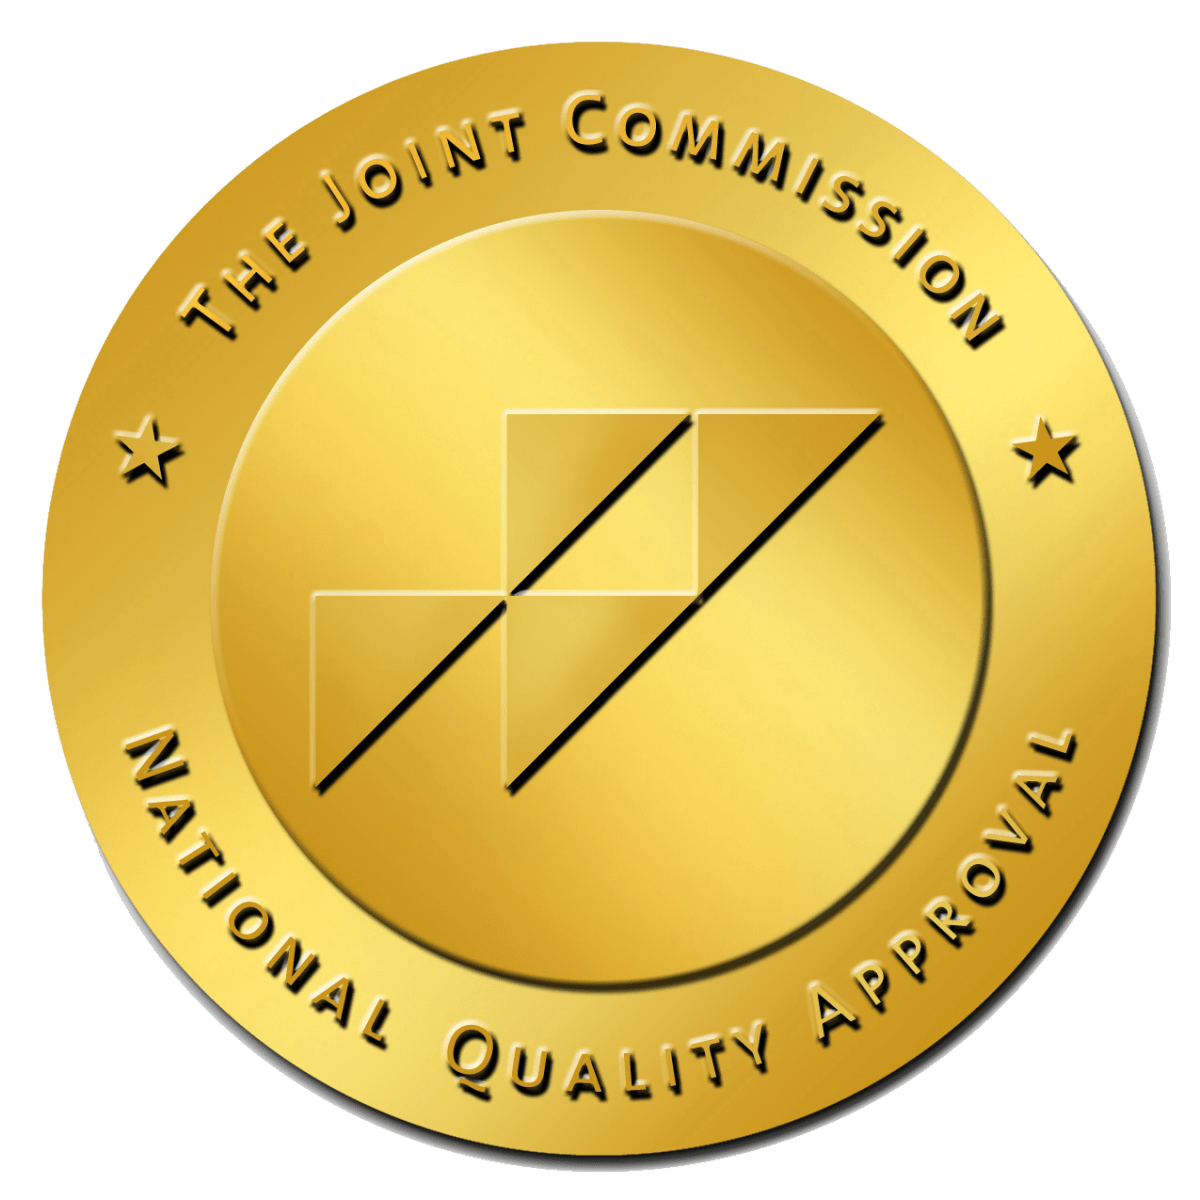 The Joint Commission National Quality Approval Seal